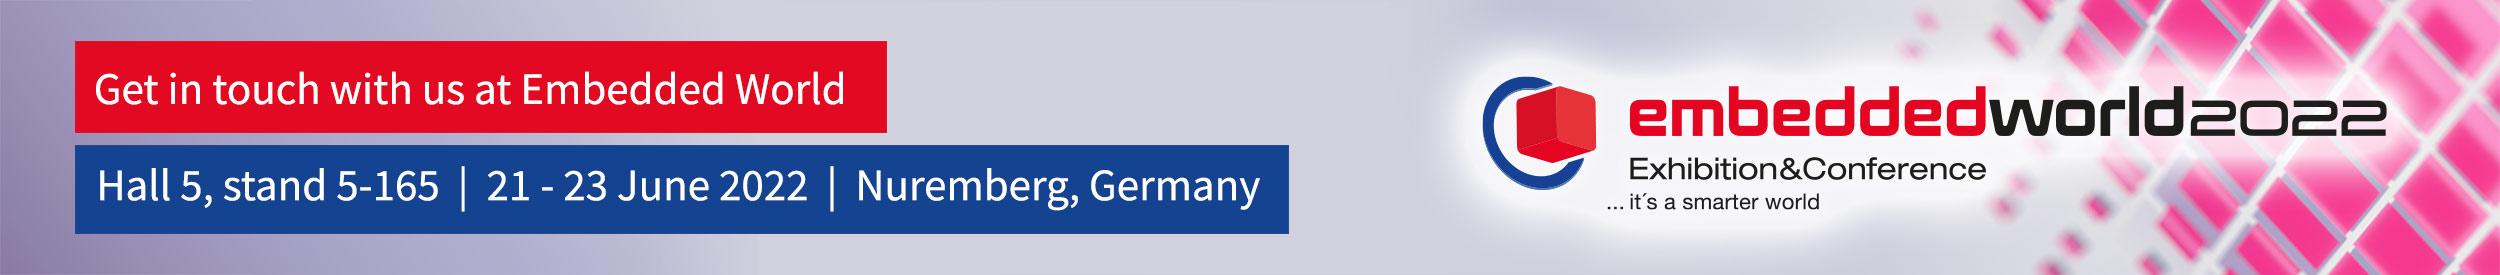 Embedded World 2022 - Nuremberg, Germany from 21st – 23rd June 2022